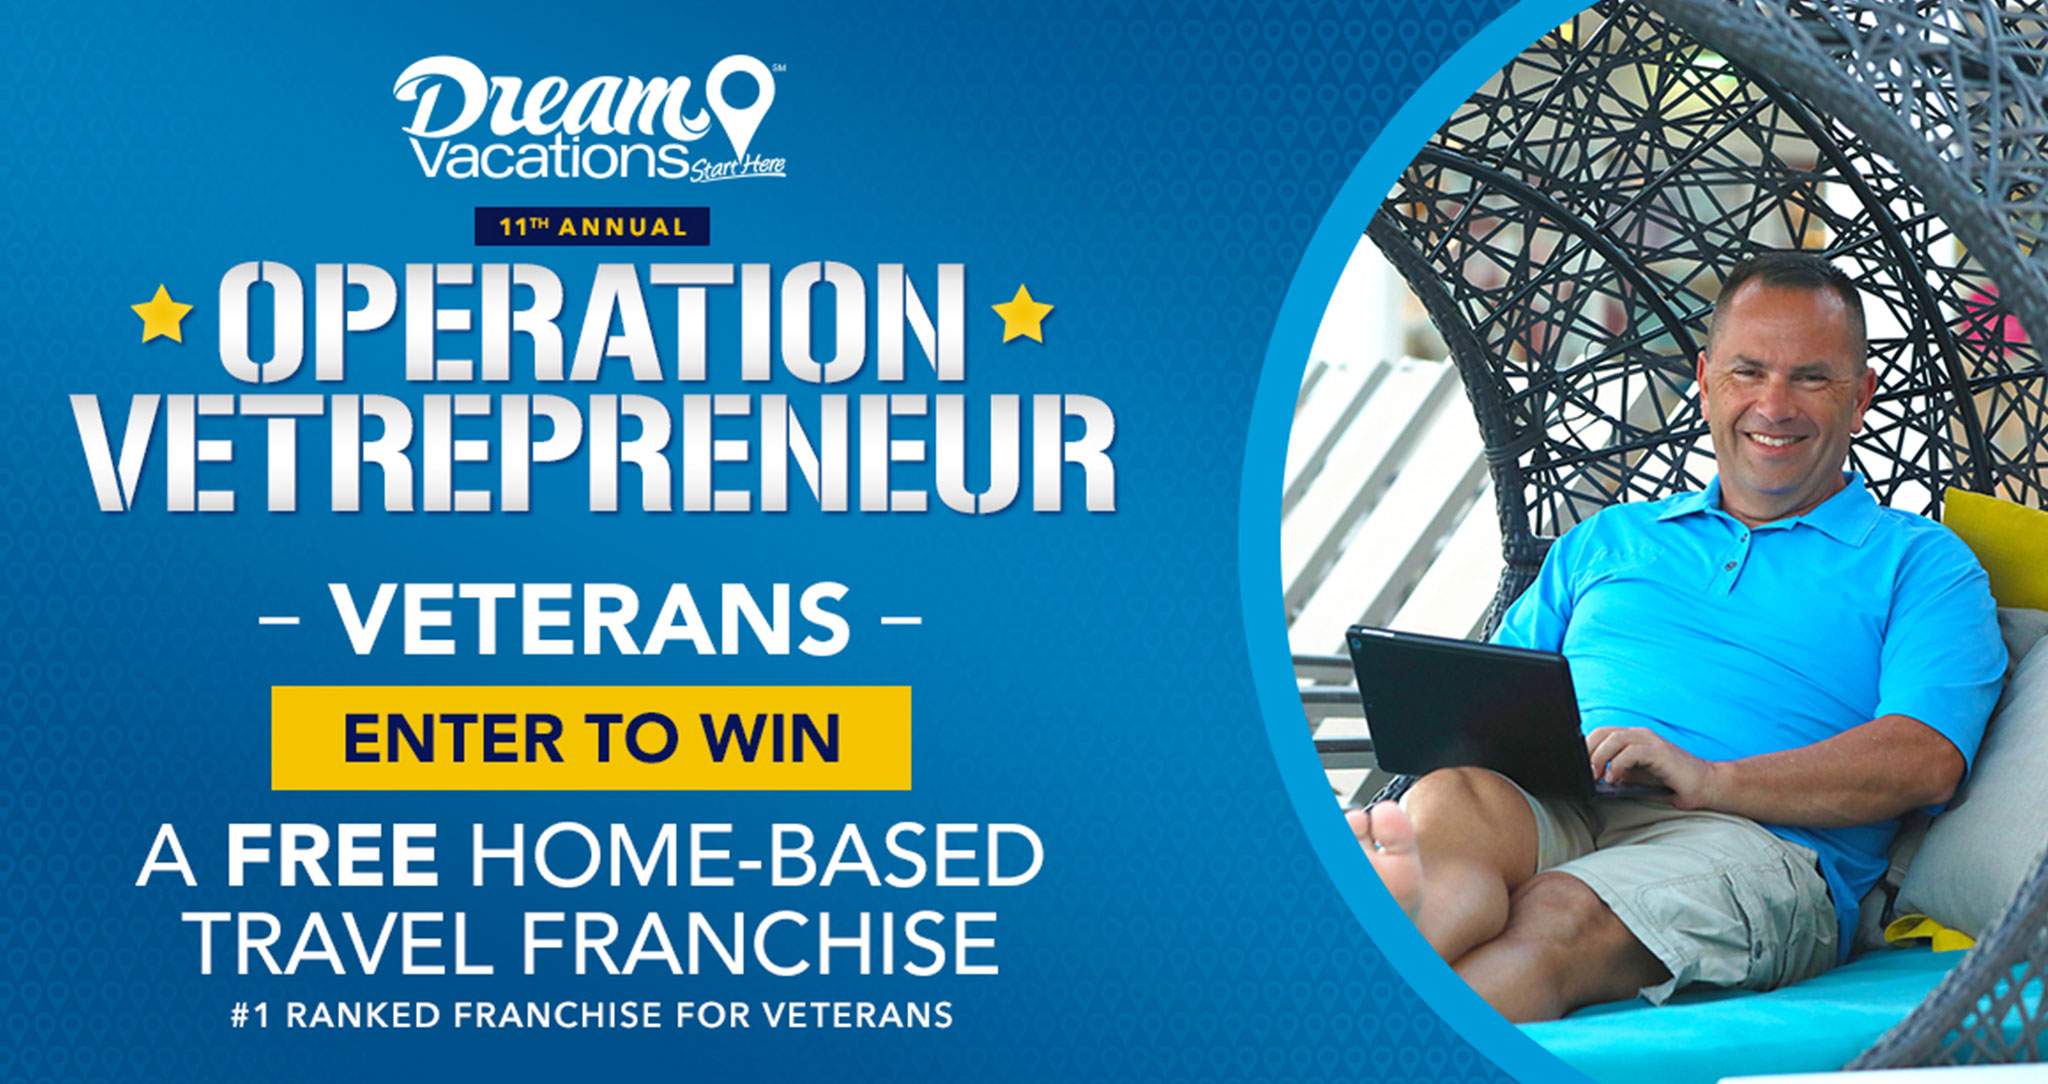 Dream Vacations - Start Here - 11th Annual Operation Vetrepreneur - Veterans - Enter to Win - a Free Home-Based Travel Franchise - #1 Ranked Franchise for Veterans (text)